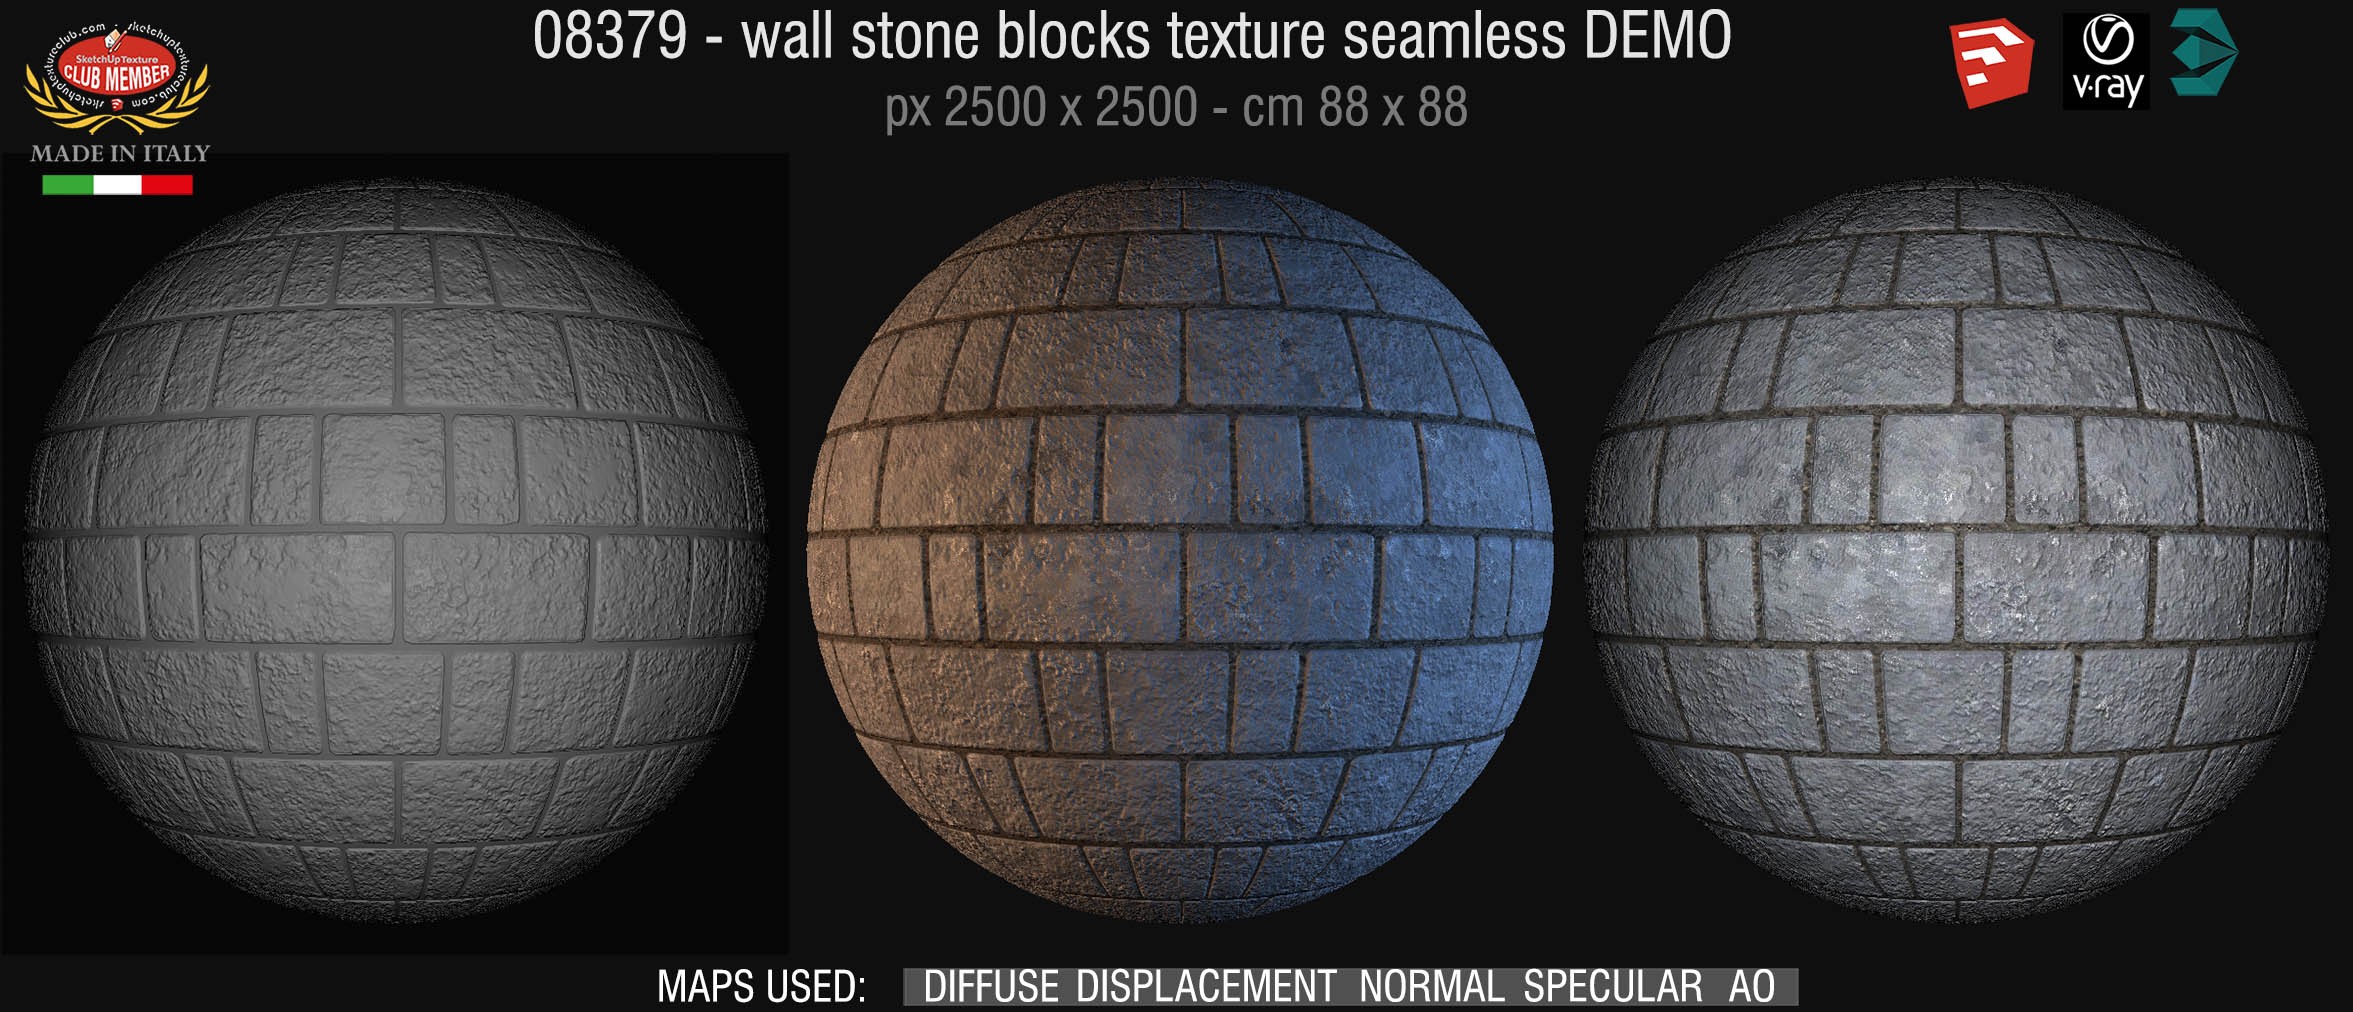 08379 HR Wall stone with regular blocks texture + maps DEMO